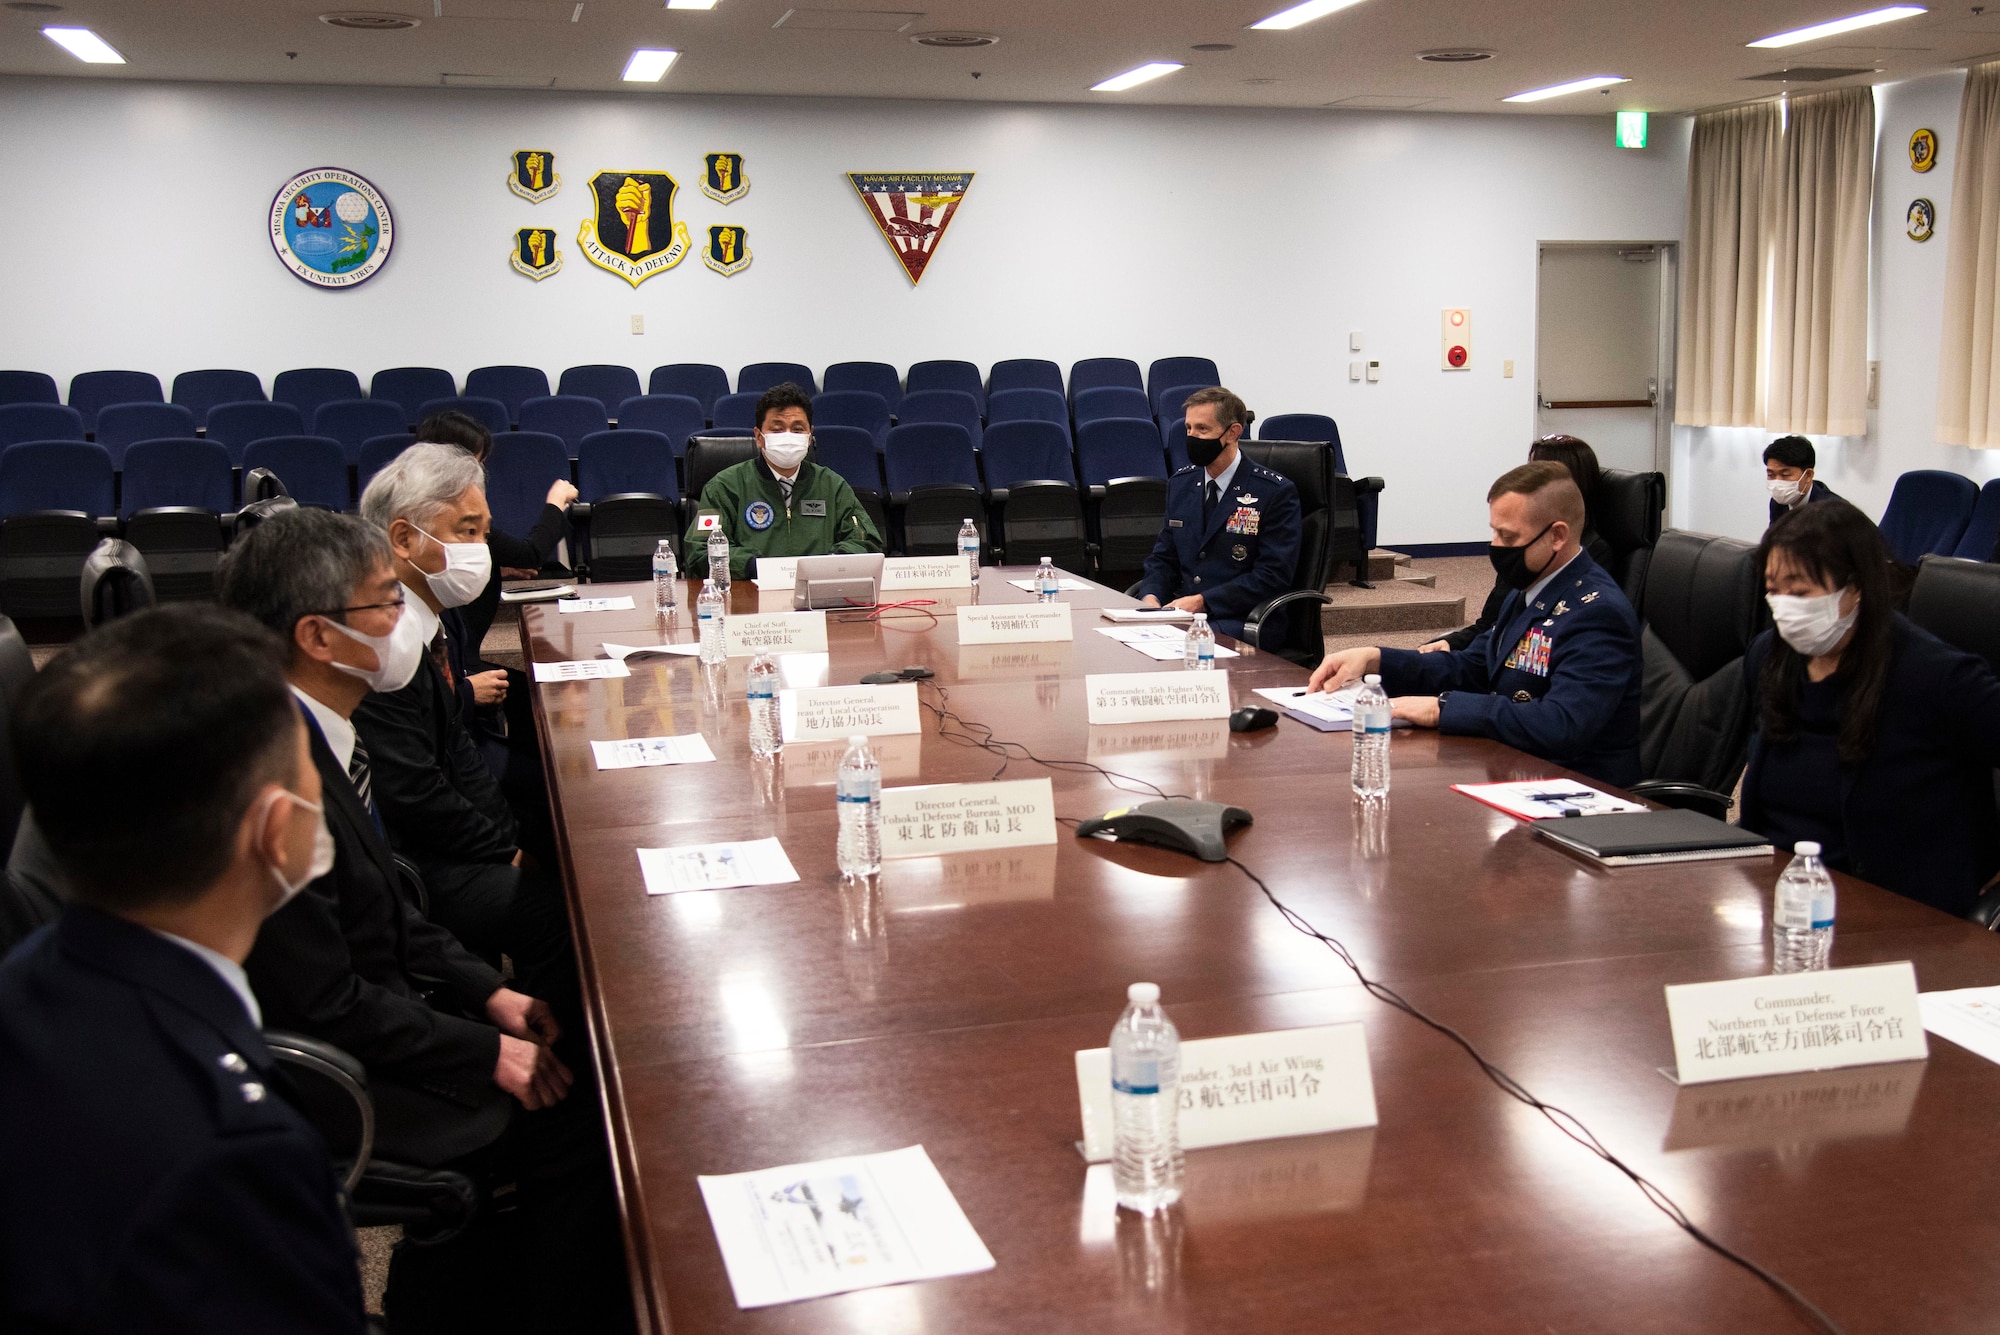 Japan Minister of Defense, Nobuo Kishi, receives the 35th Fighter Wing mission briefing from by Col. Jesse Friedel, 35th FW commander, during a visit at Misawa Air Base on April 3, 2021. During the visit, Minister of Defense Kishi received briefings about the F-16 Fighting Falcon, and the 35th FW’s mission to defend Japan with advanced Suppression of Enemy Air Defense and Destruction of Enemy Air Defense capabilities. SEAD and DEAD capabilities are critical to maintaining credible deterrence and defense in the Indo-Pacific region. (U.S. Air force photo by Maj. Cody Chiles)